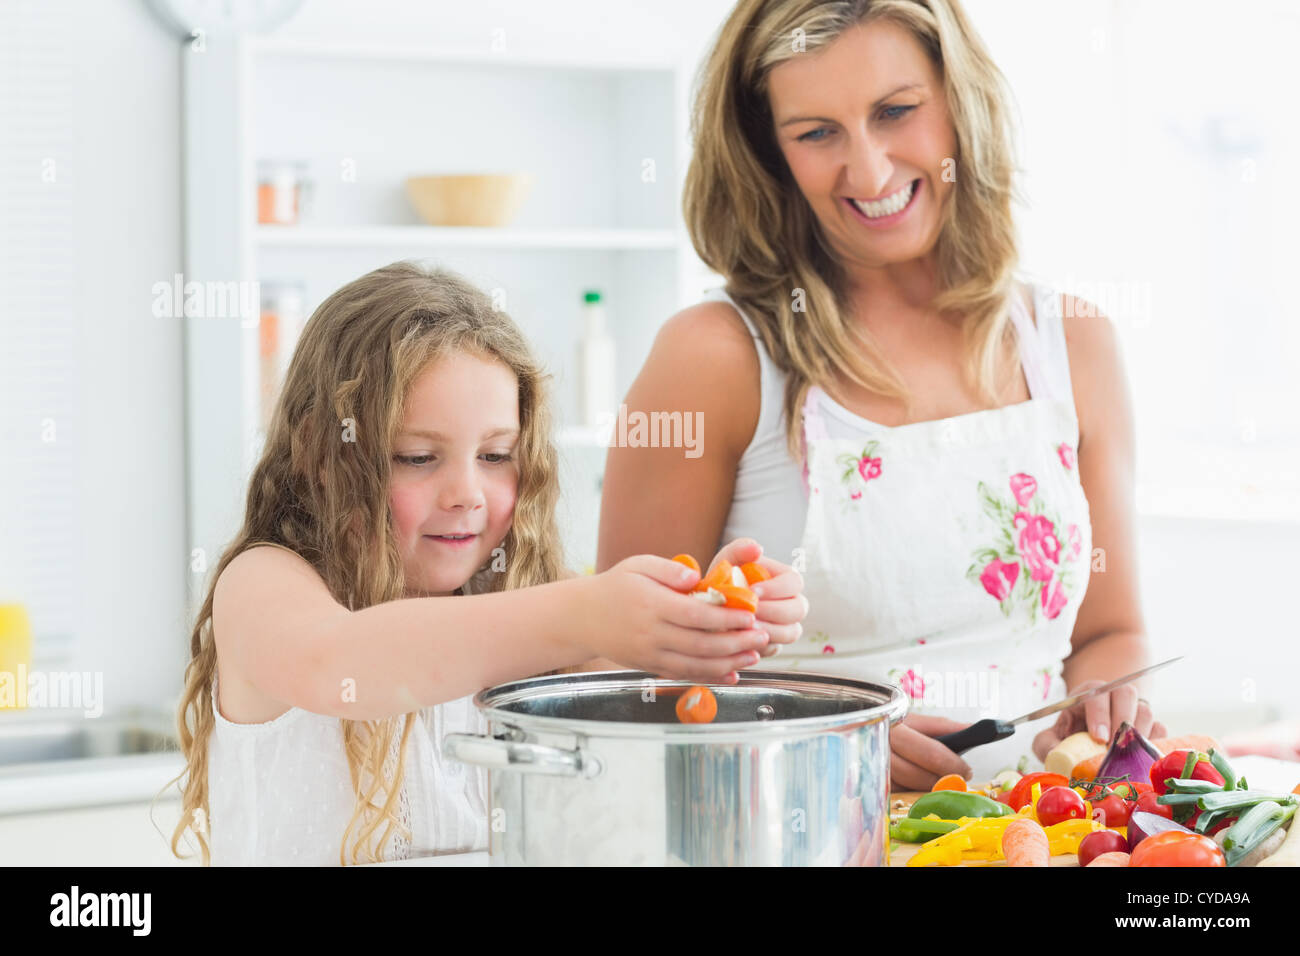 Smiling mother and daughter working at the kitchen Stock Photo